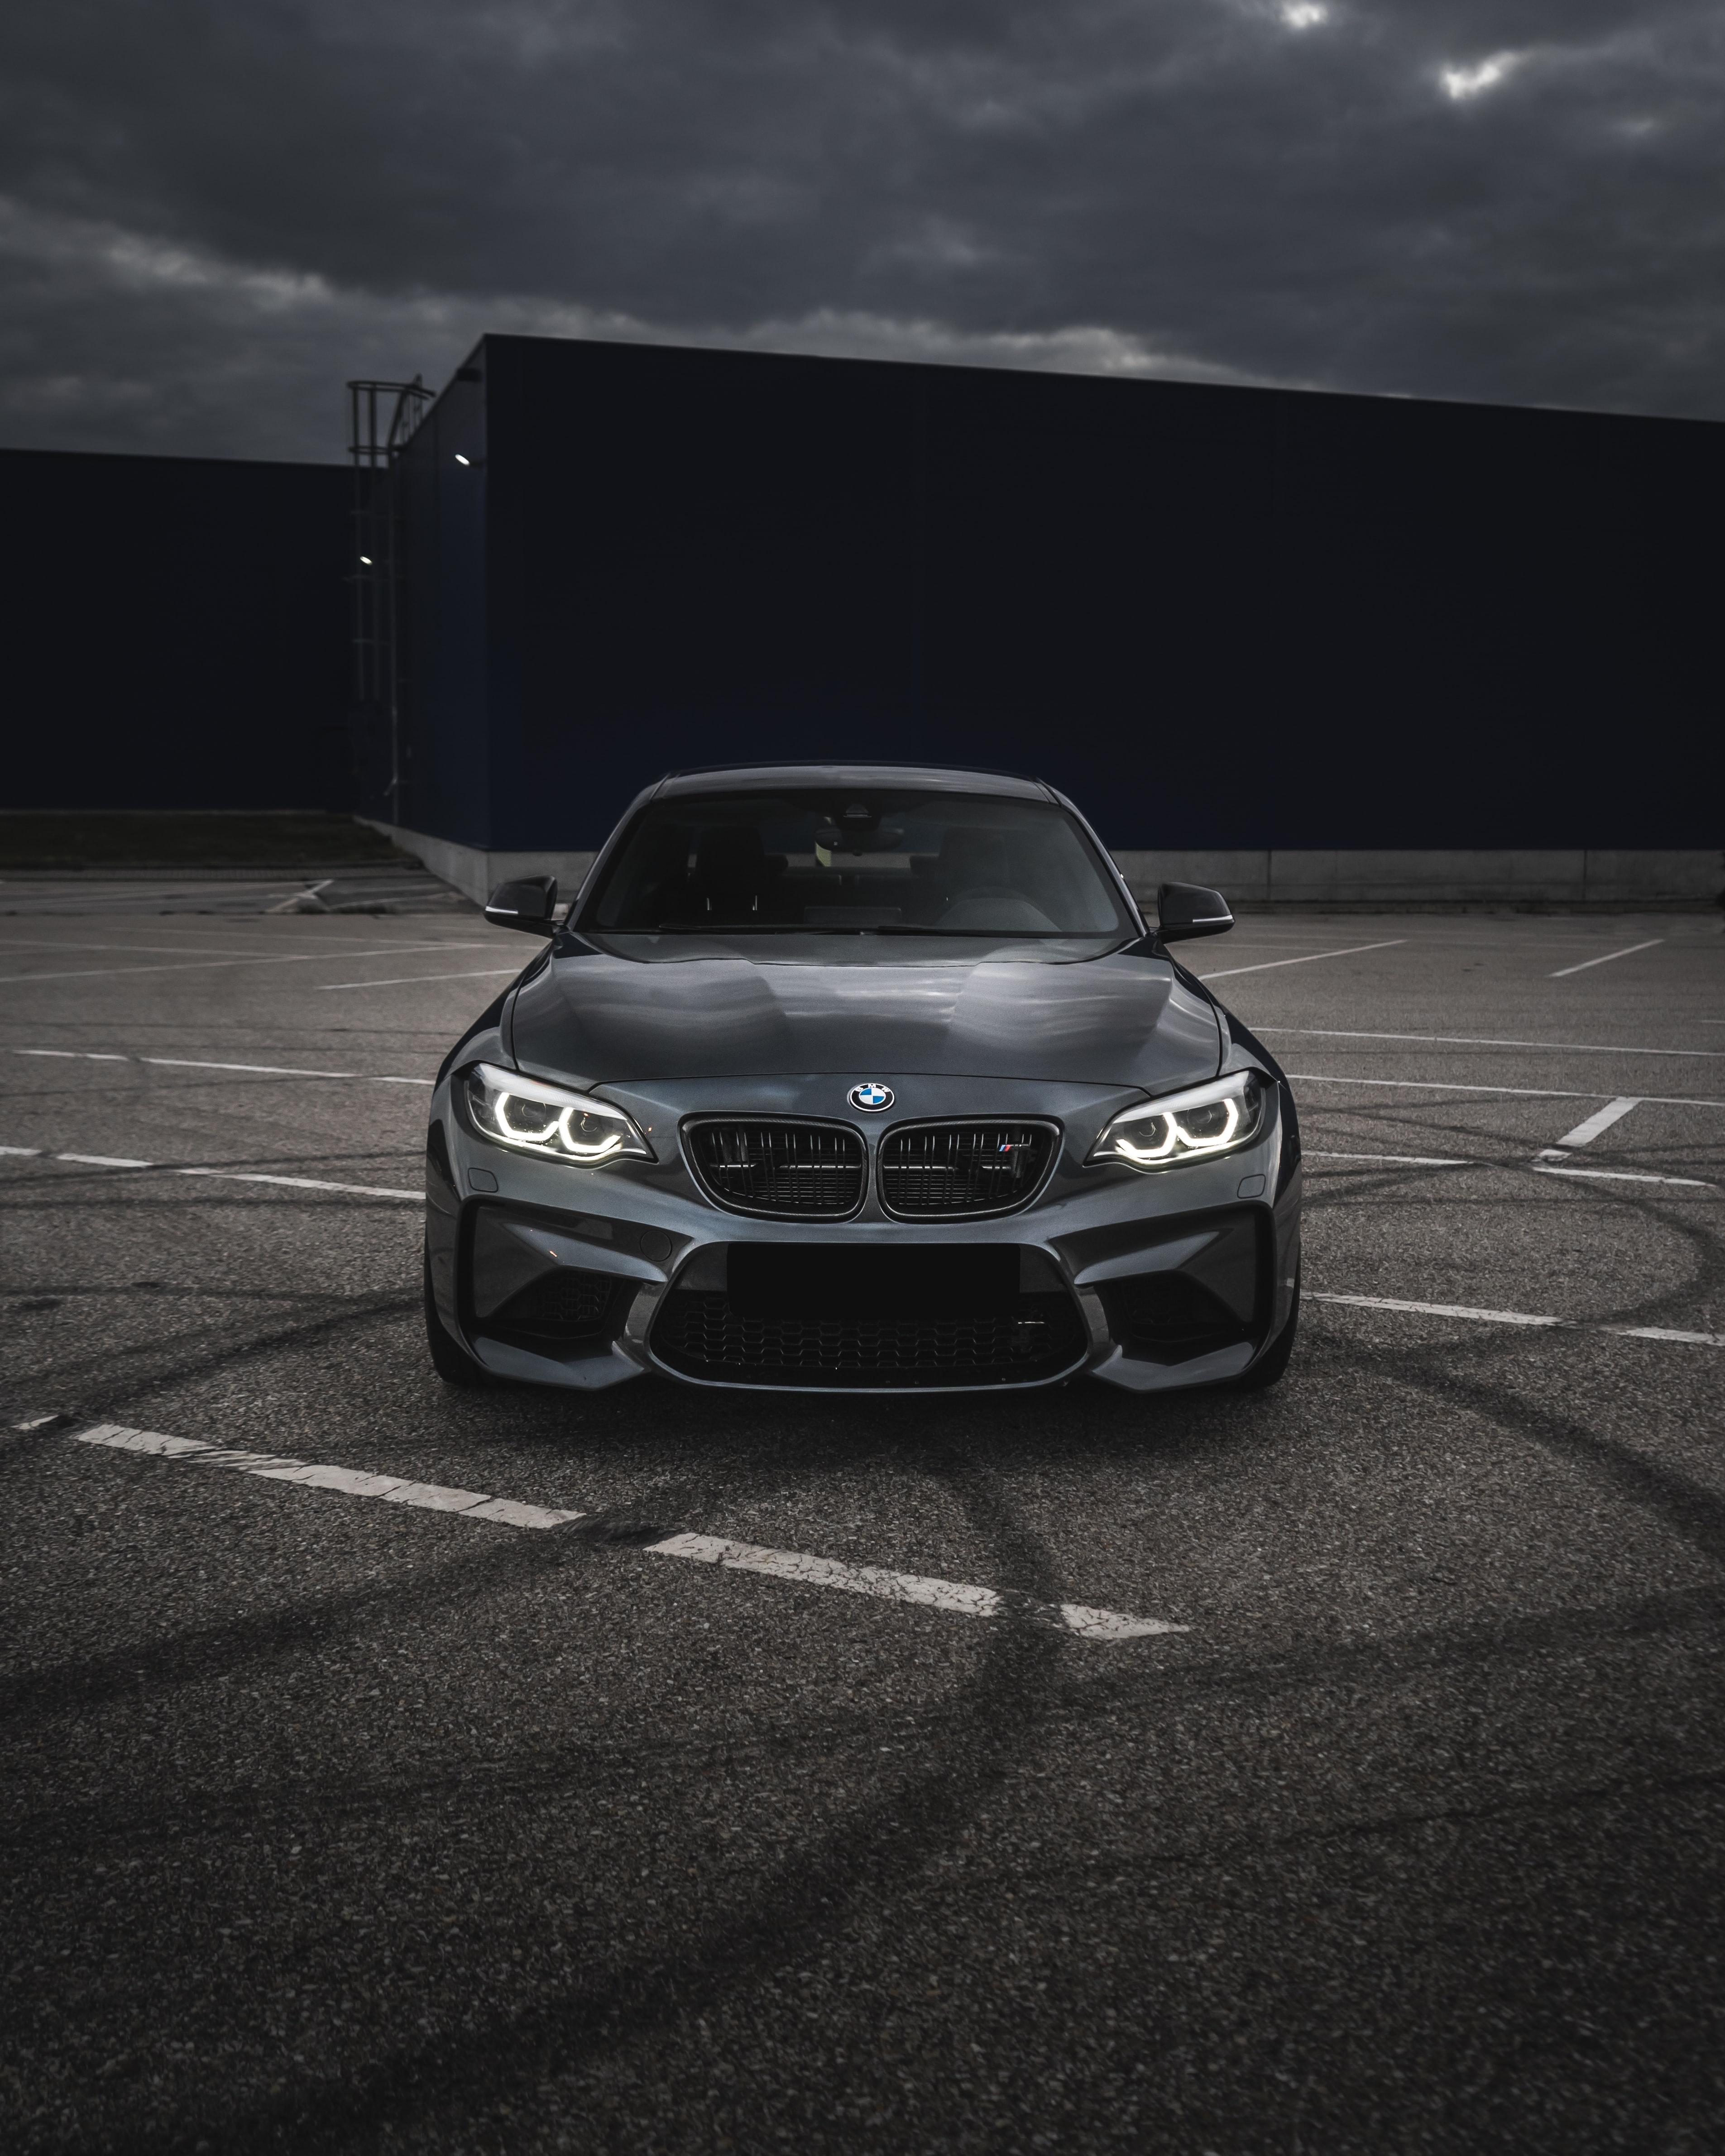 grey, cars, front view, car Bmw HQ Background Images